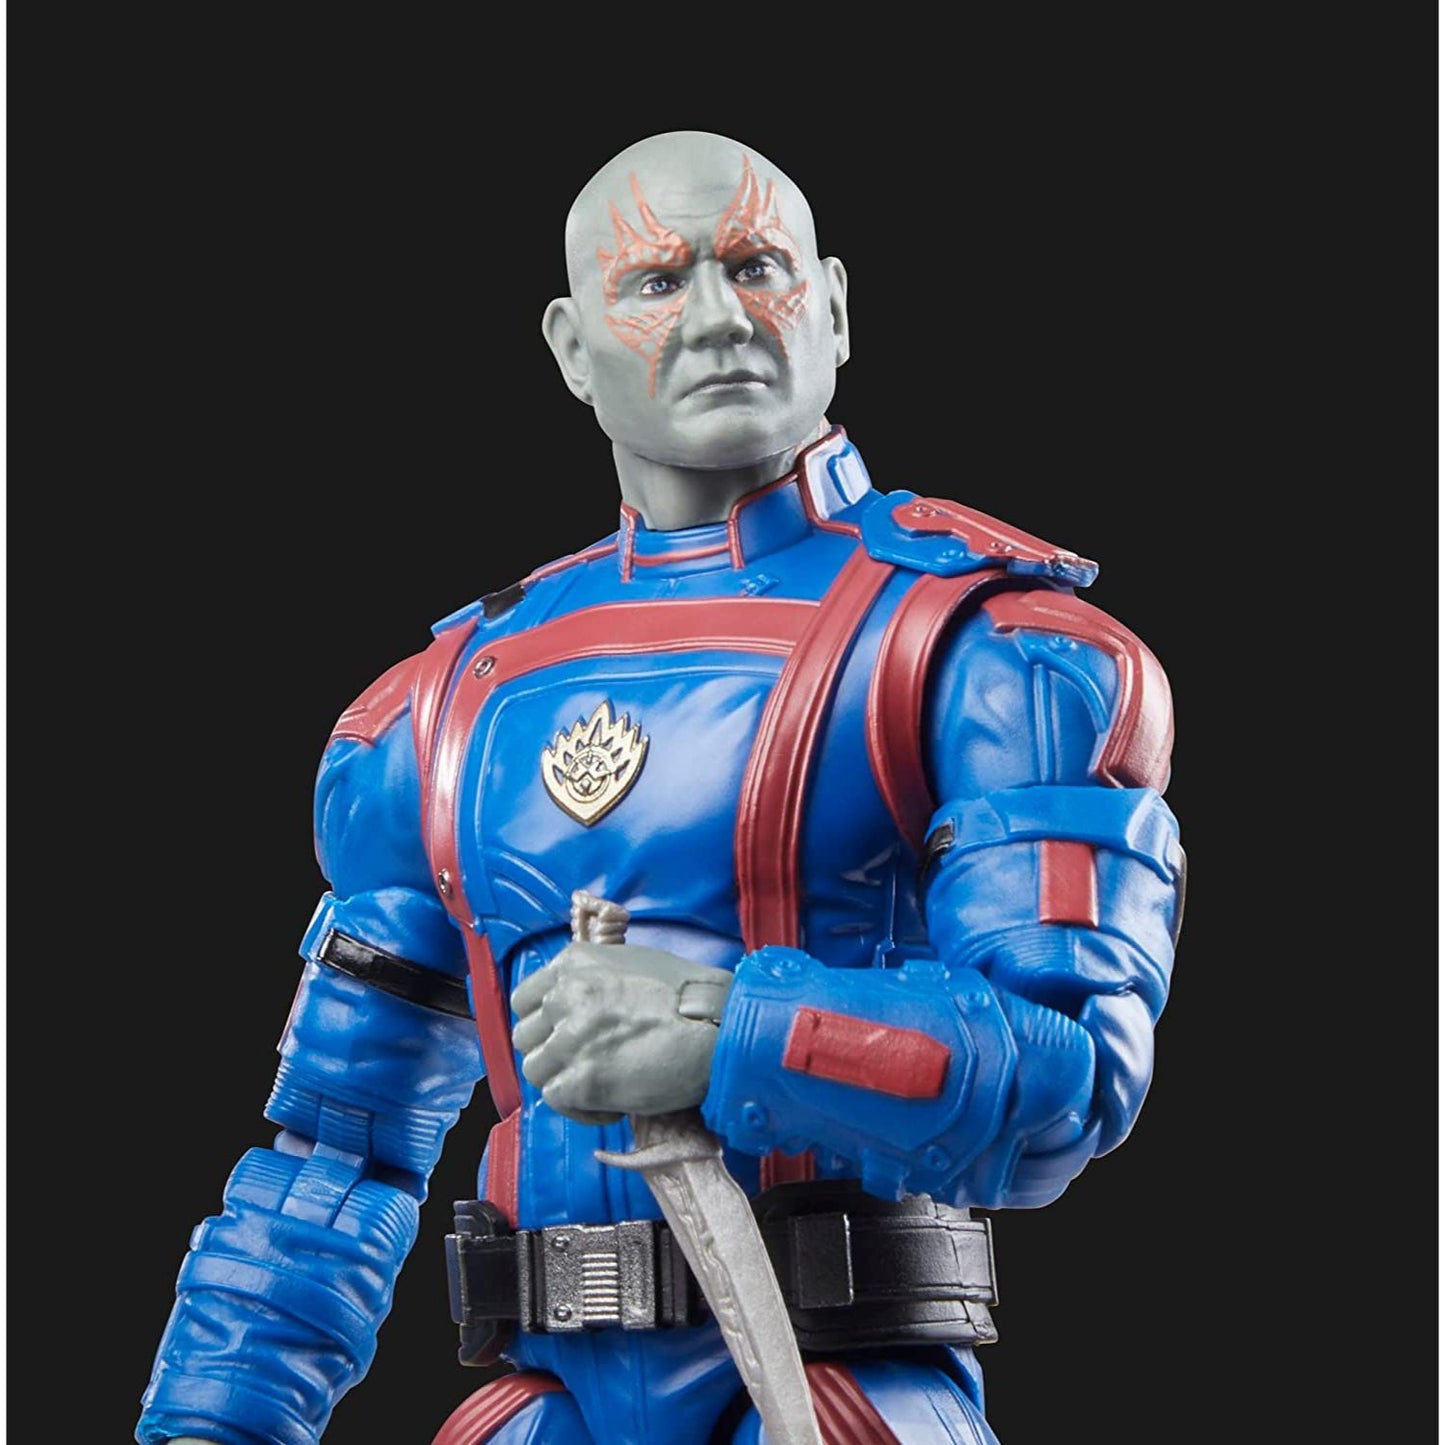 Guardians of the Galaxy Vol. 3 Marvel Legends Drax 6-Inch Action Figure Toy - HERETOSERVEYOU